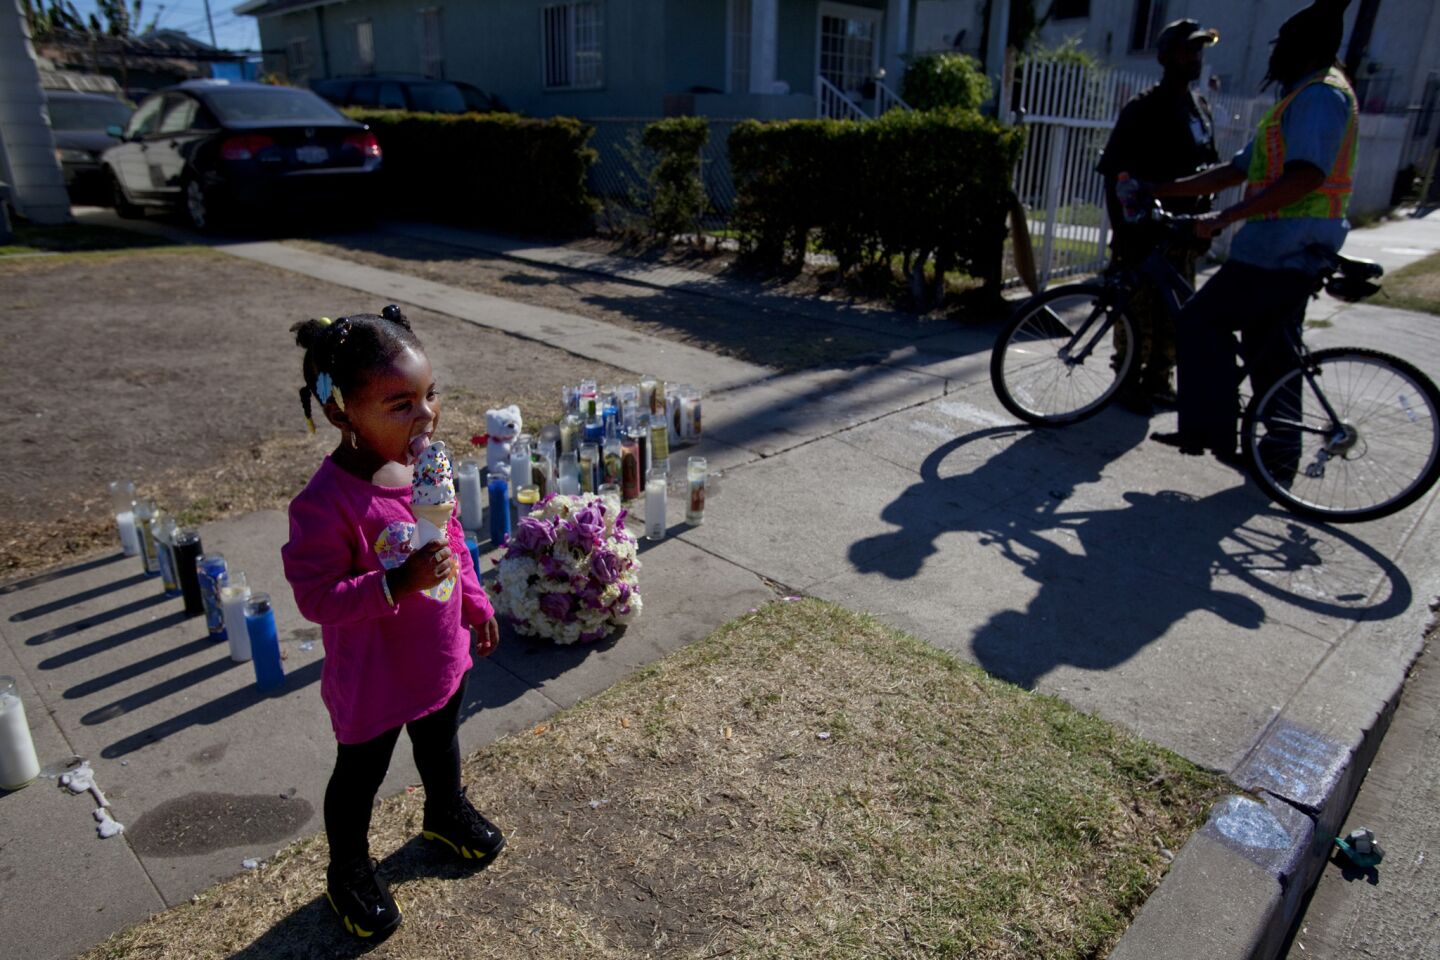 Aubriel Turner, 2, eats an ice cream cone Wednesday near candles placed on the sidewalk in remembrance of her cousin, Ezell Ford, who was killed by Los Angeles police officers in the 200 block of West 65th Street.